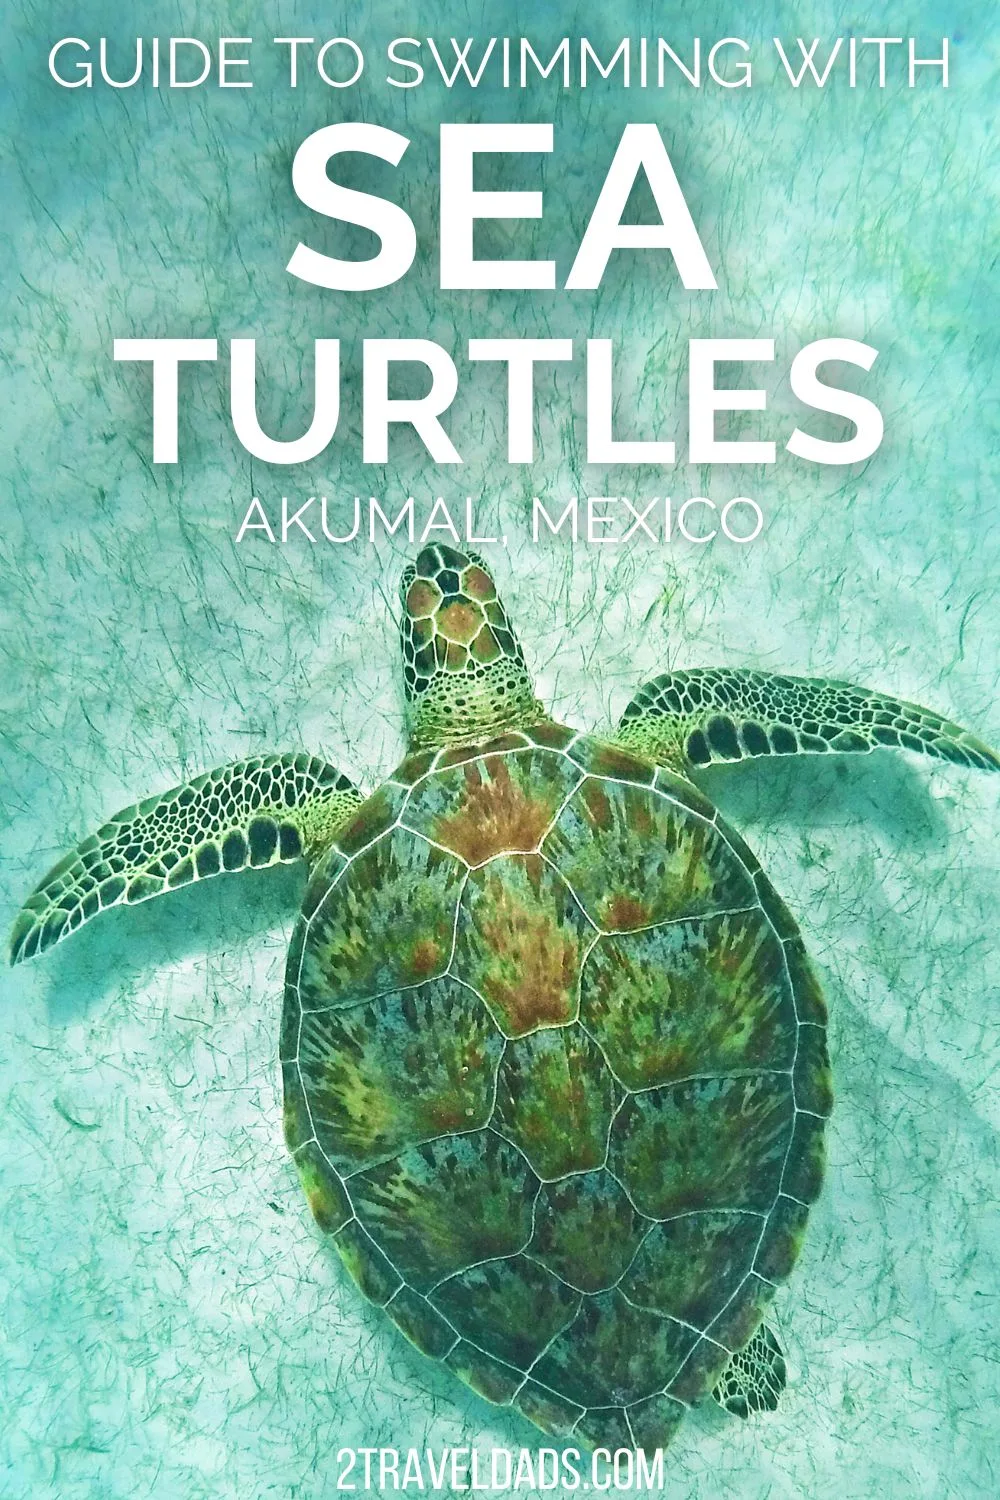 Swimming with Sea Turtles in Akumal, Mexico is really neat, but also can have a negative impact on the animal. Tips for how to see sea turtles, how to respectfully observe and what to expect in Akumal, Mexico.